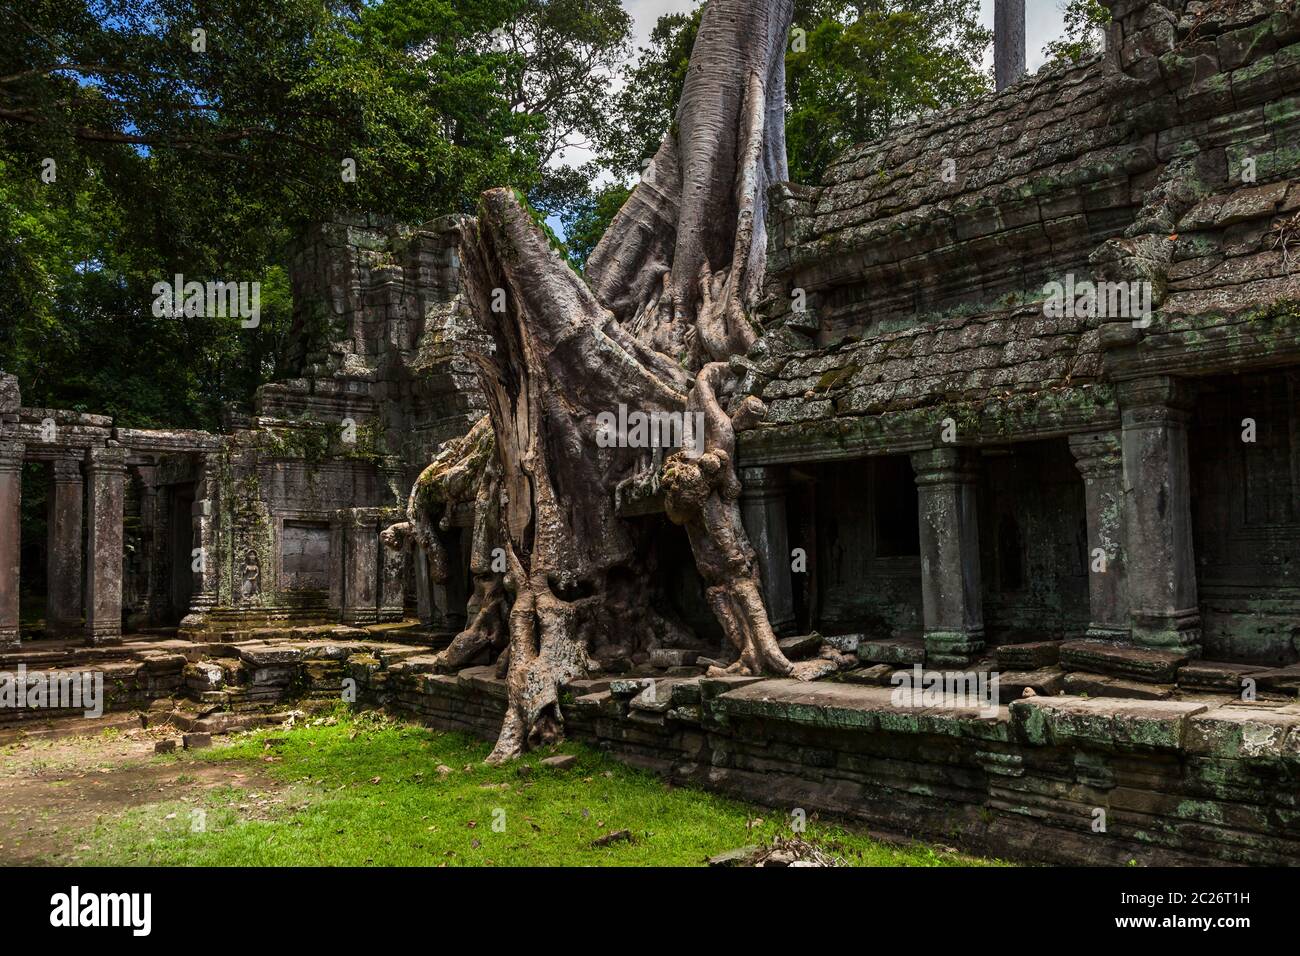 Preah Khan Temple, corroded by root of giant tree, Ancient capital of Khmer Empire, Siem Reap, Cambodia, Southeast Asia, Asia Stock Photo